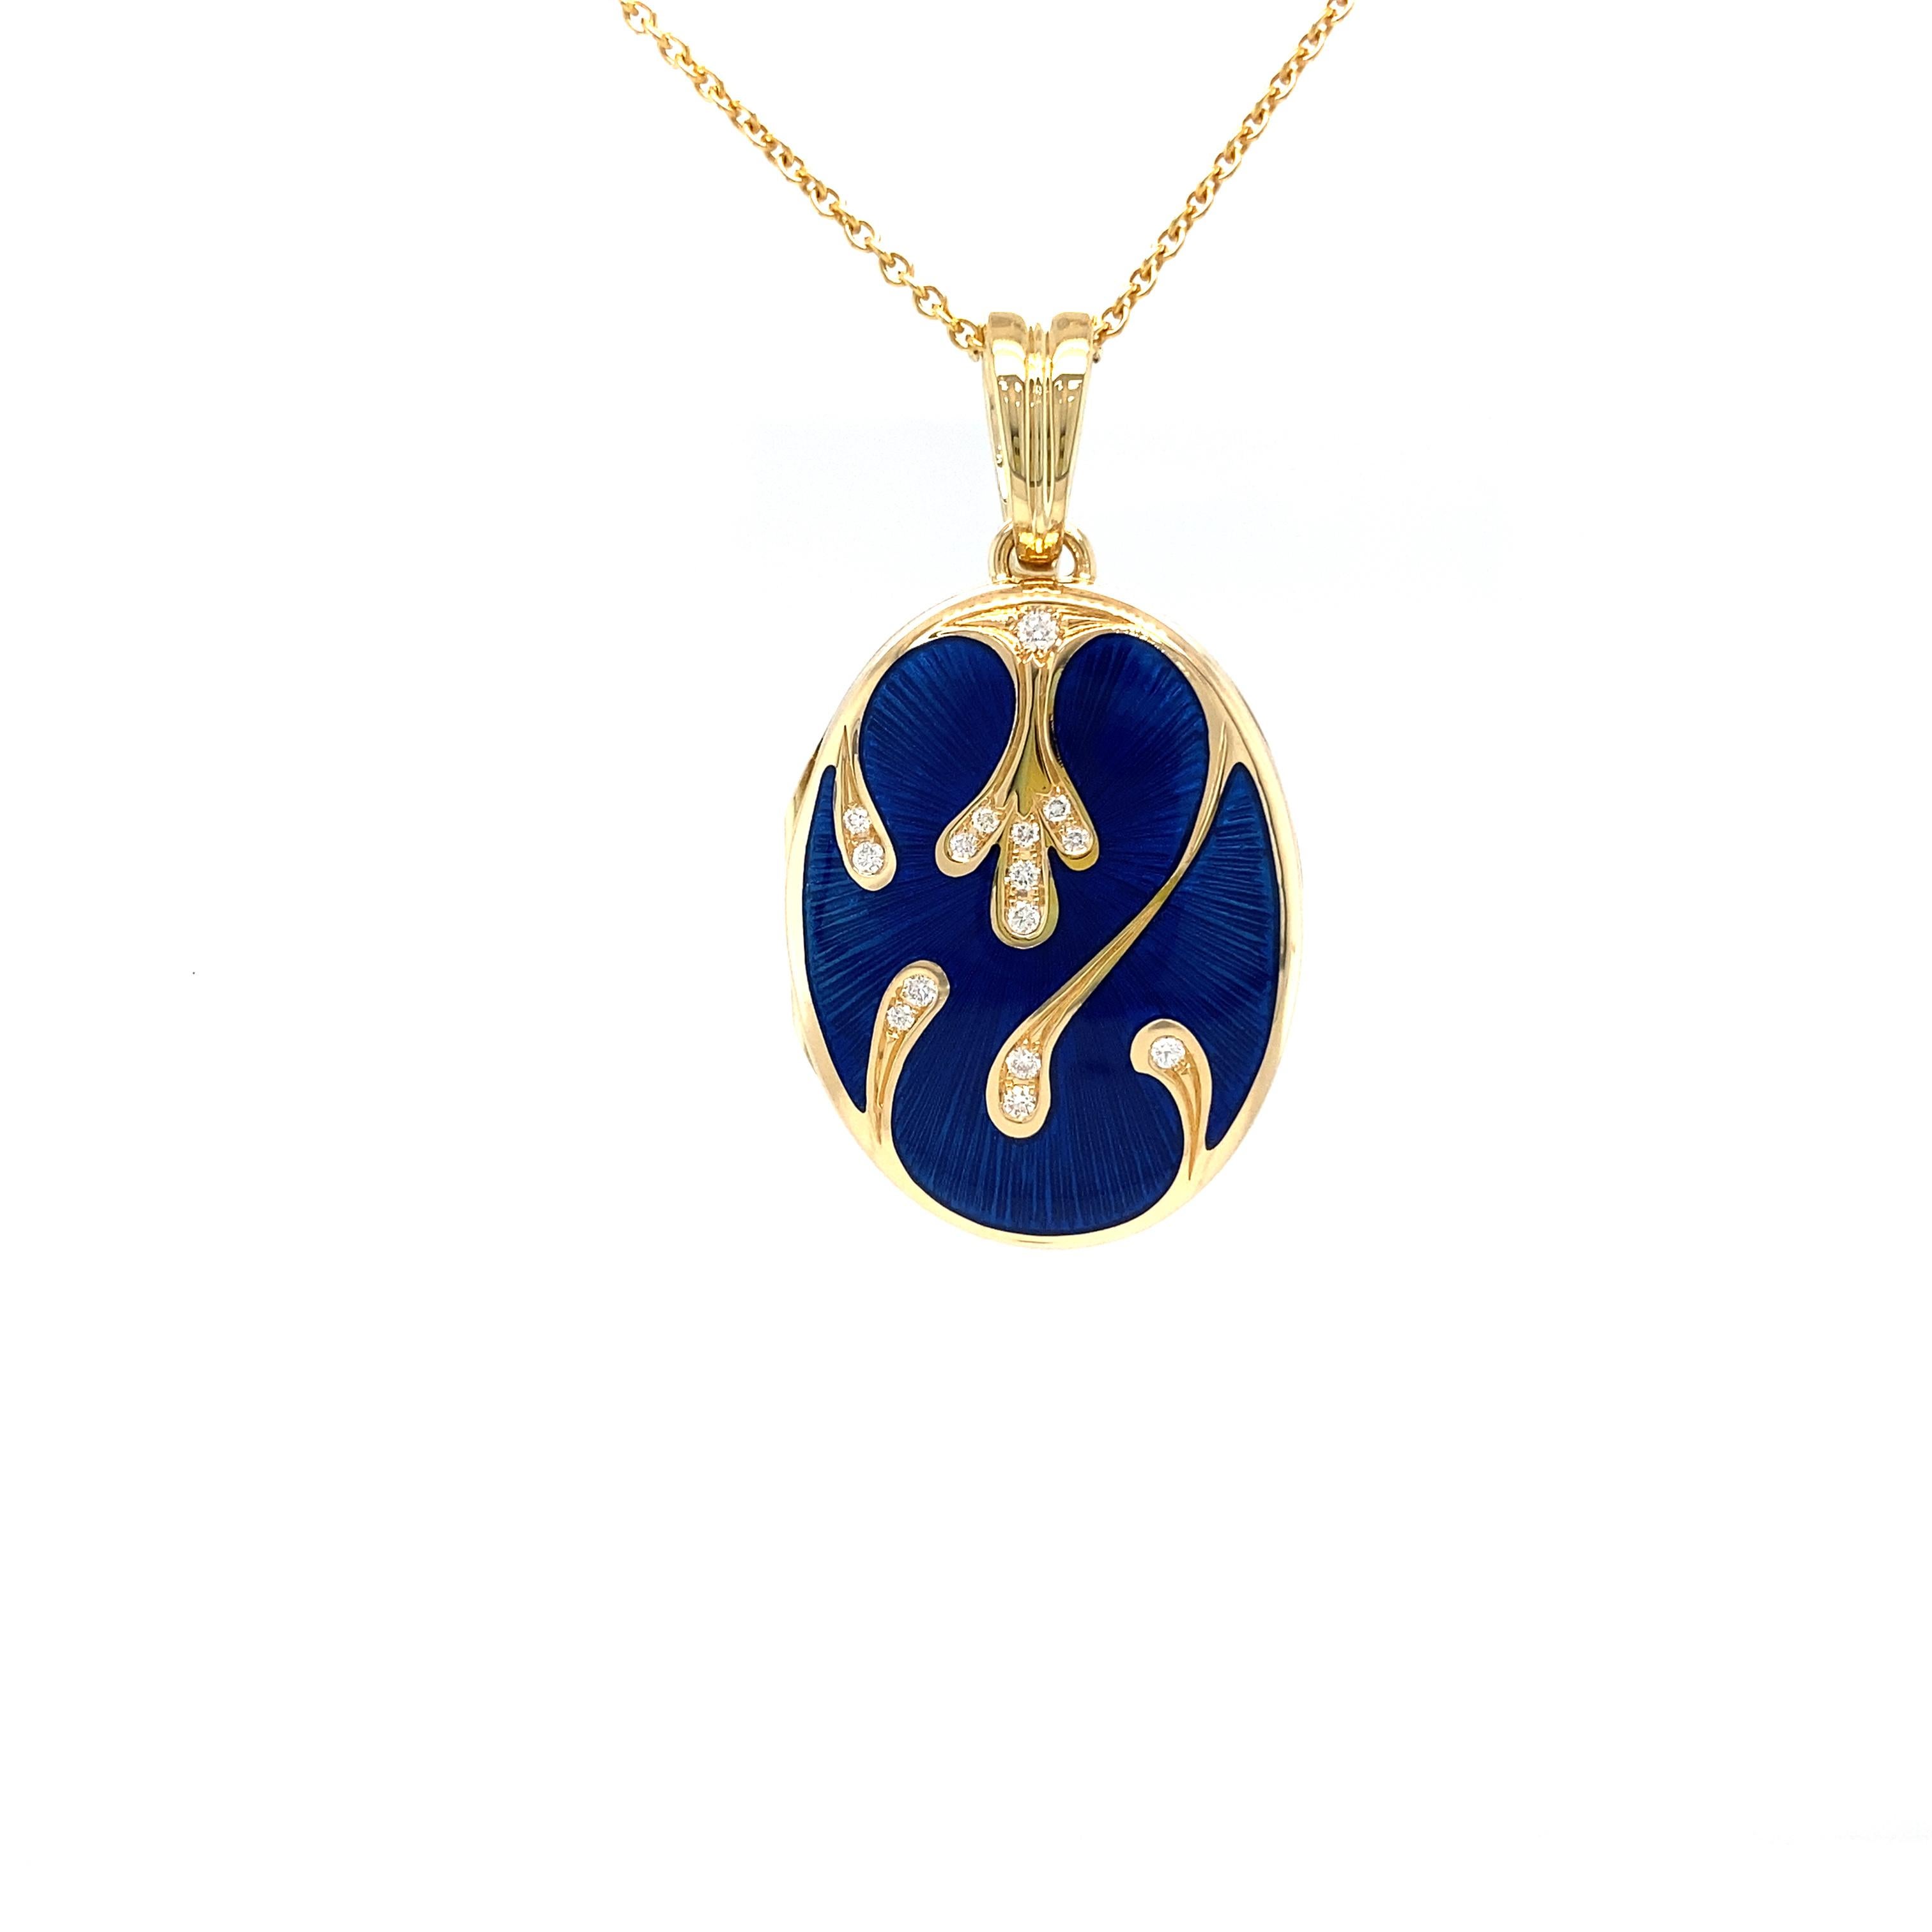 Victor Mayer oval locket pendant necklace 18k yellow gold, Hallmark collection, translucent electric blue vitreous enamel, guilloche, 15 diamonds, total 0.16 ct, H VS, brilliant cut, measurements app. 27.0 mm x 20.0 mm

About the creator Victor